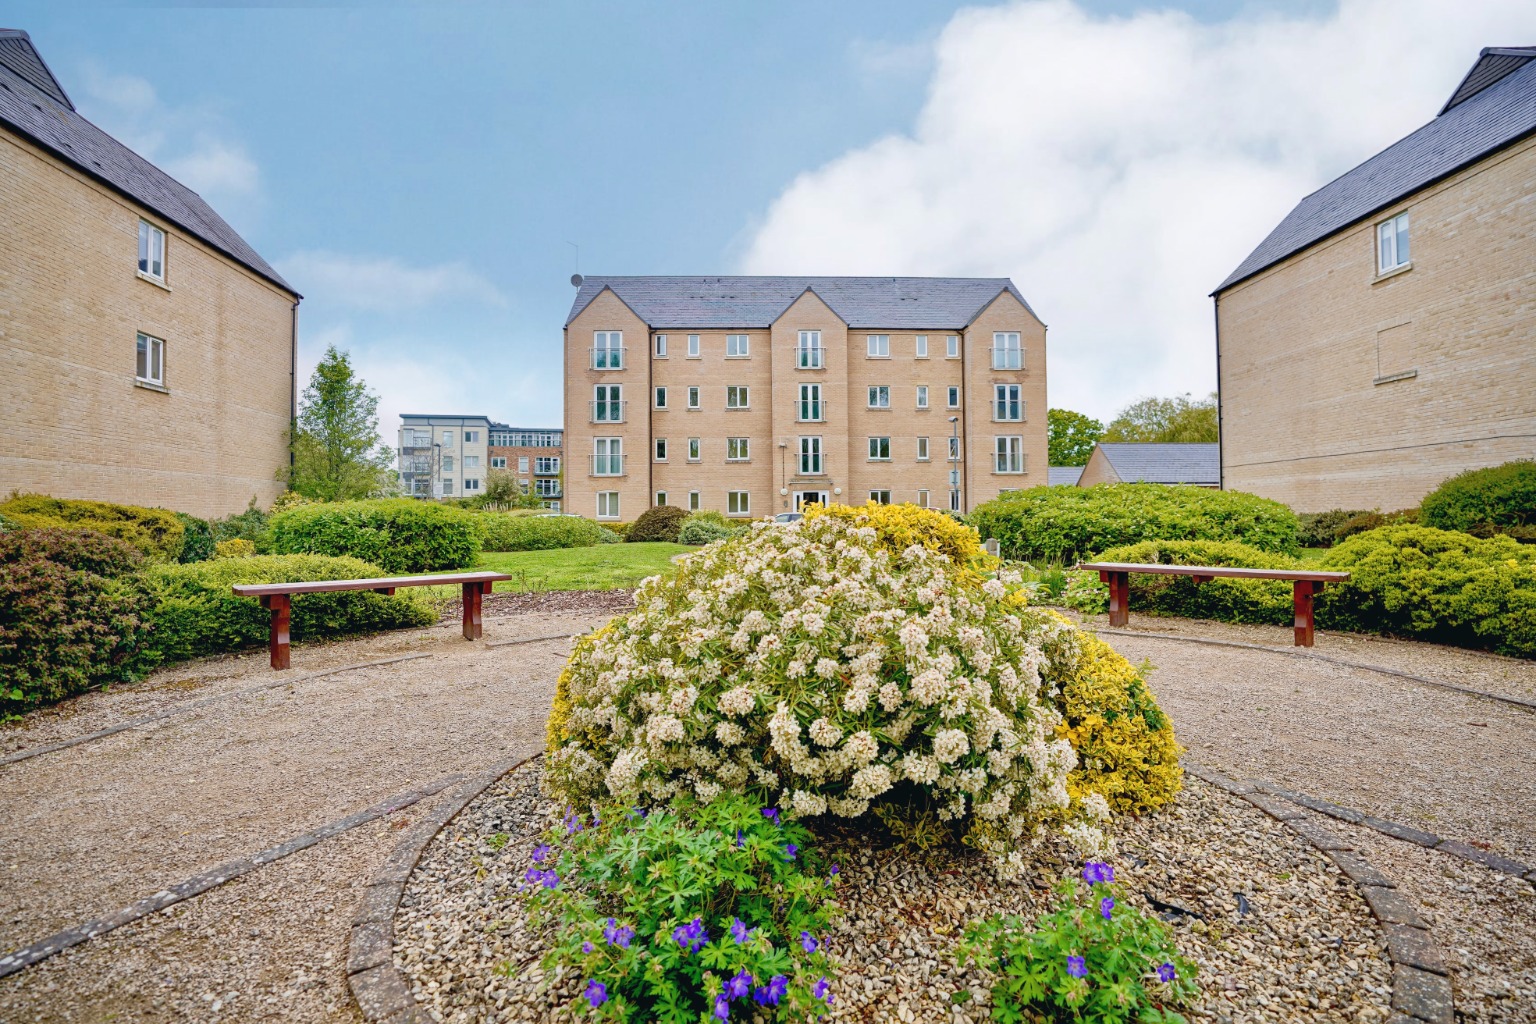 2 bed ground floor flat for sale in Skipper Way, St. Neots - Property Image 1